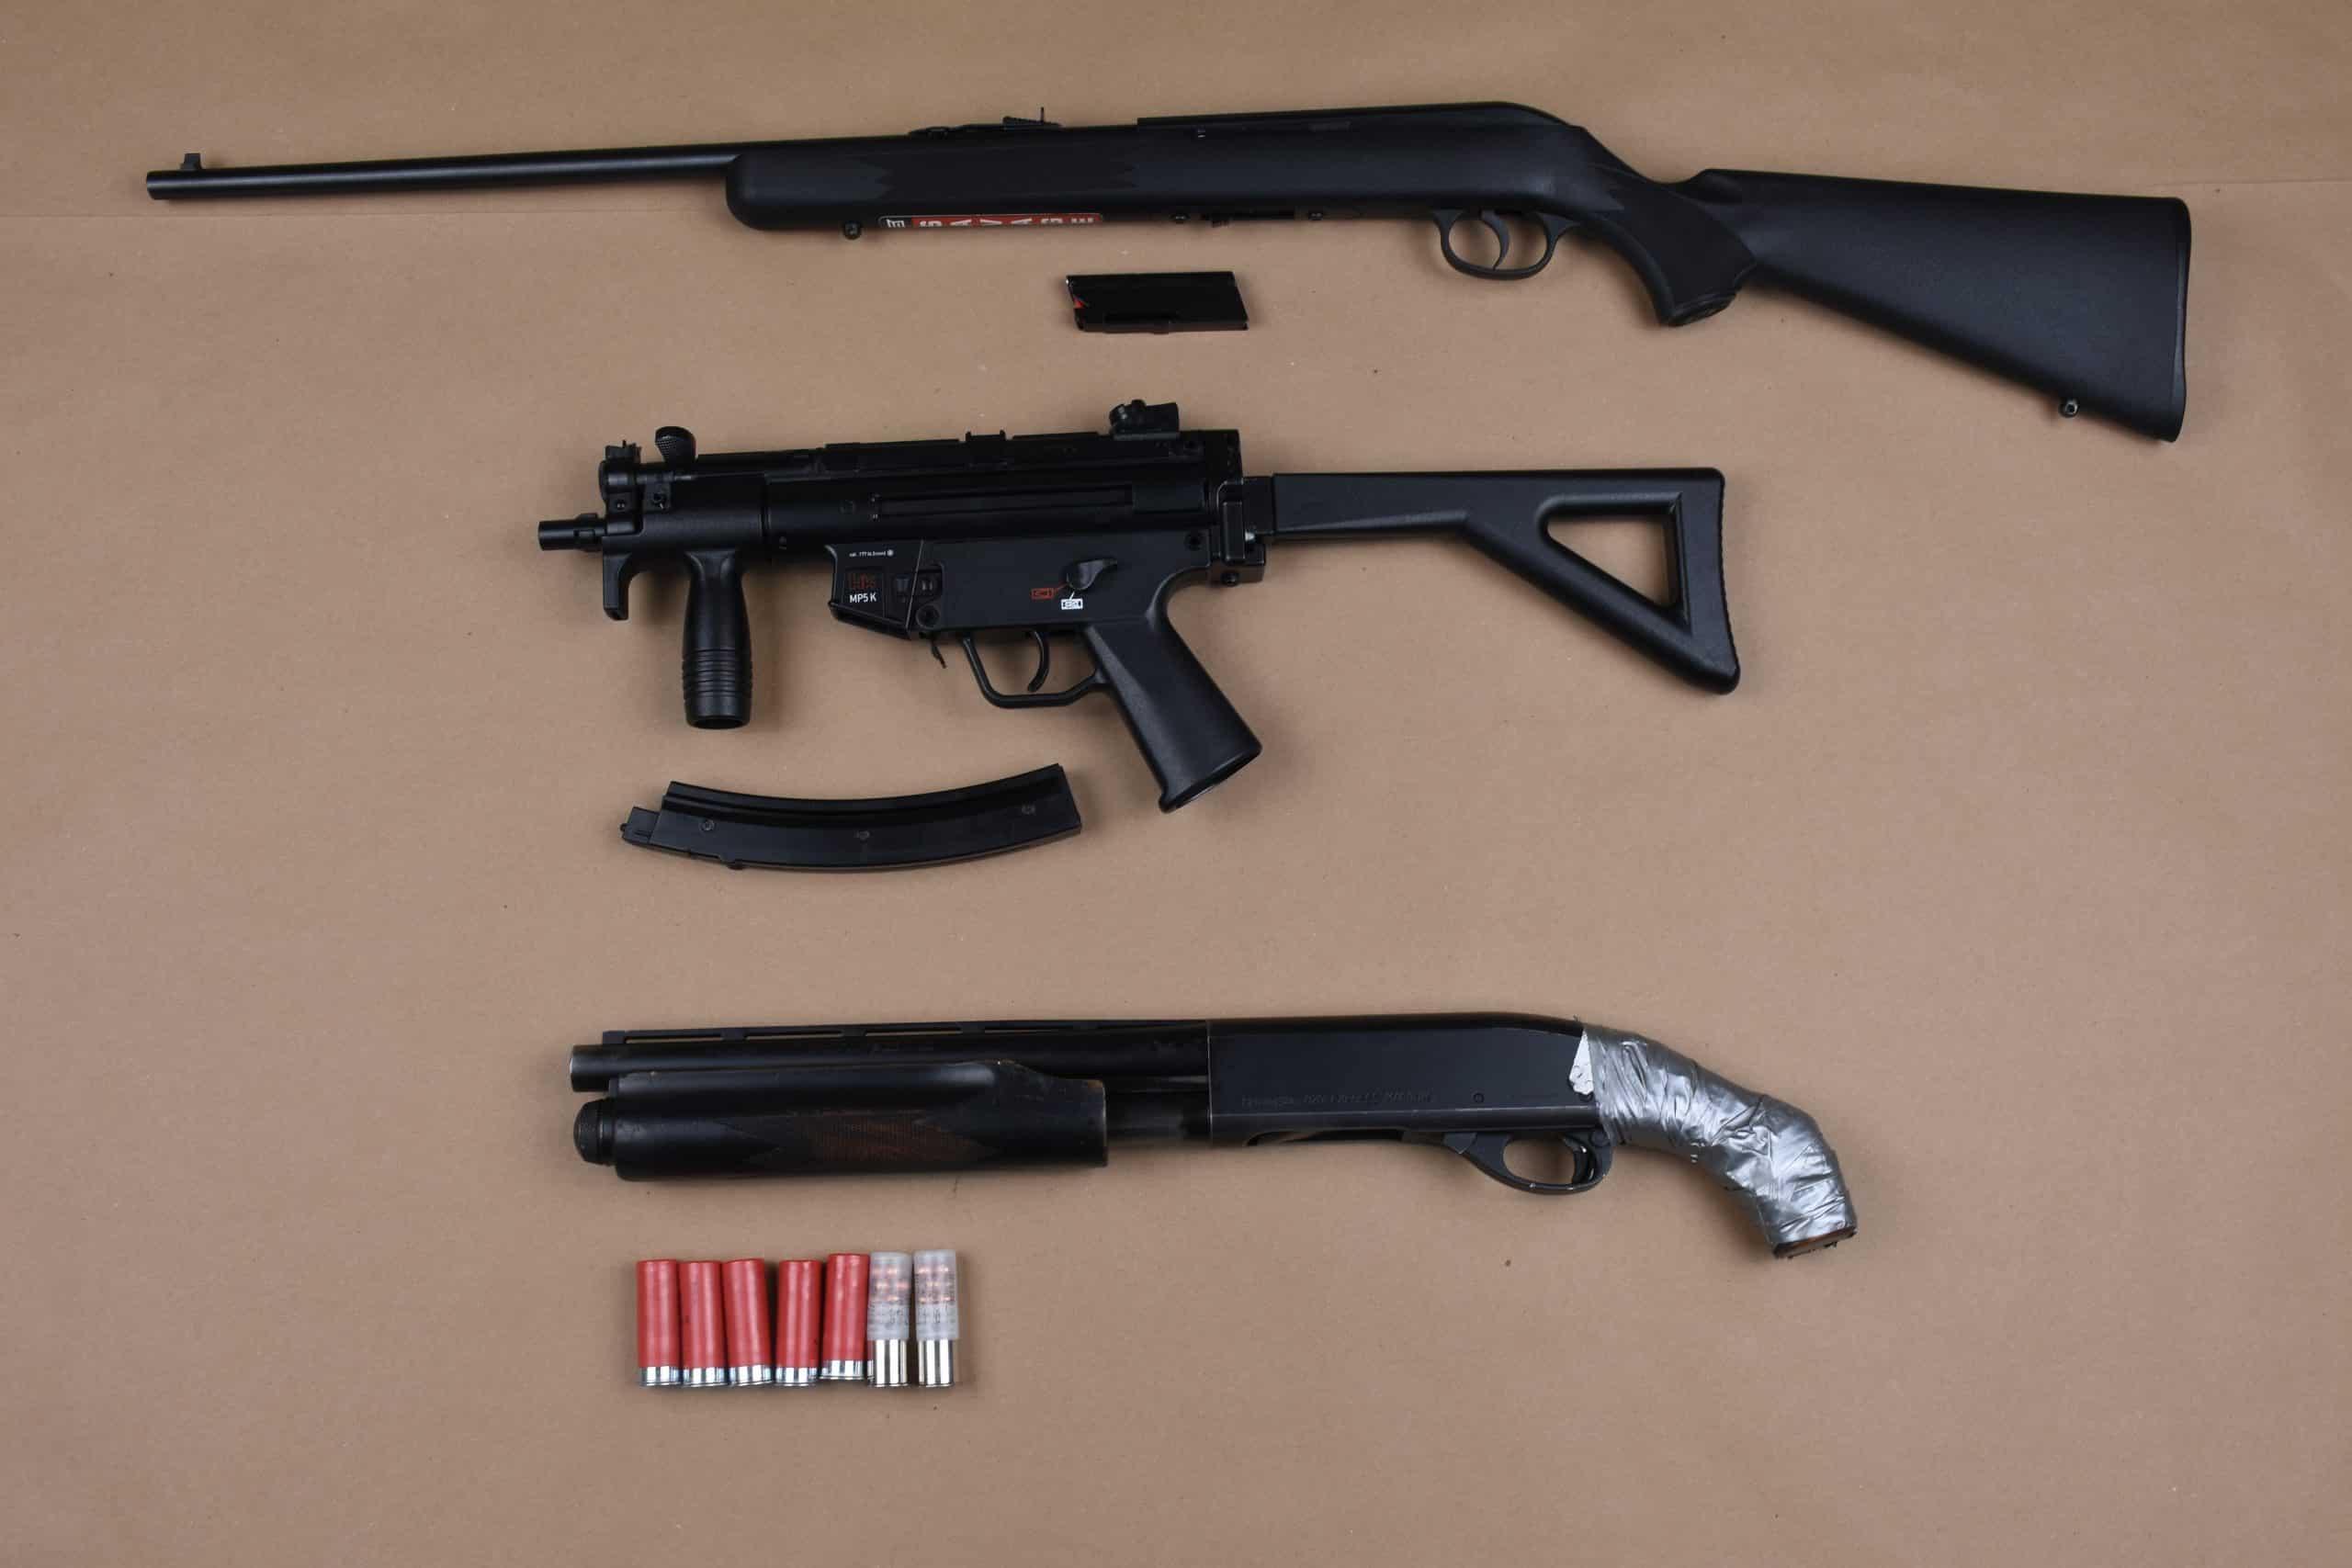 Search warrant results in 3 Brampton men facing firearms charges